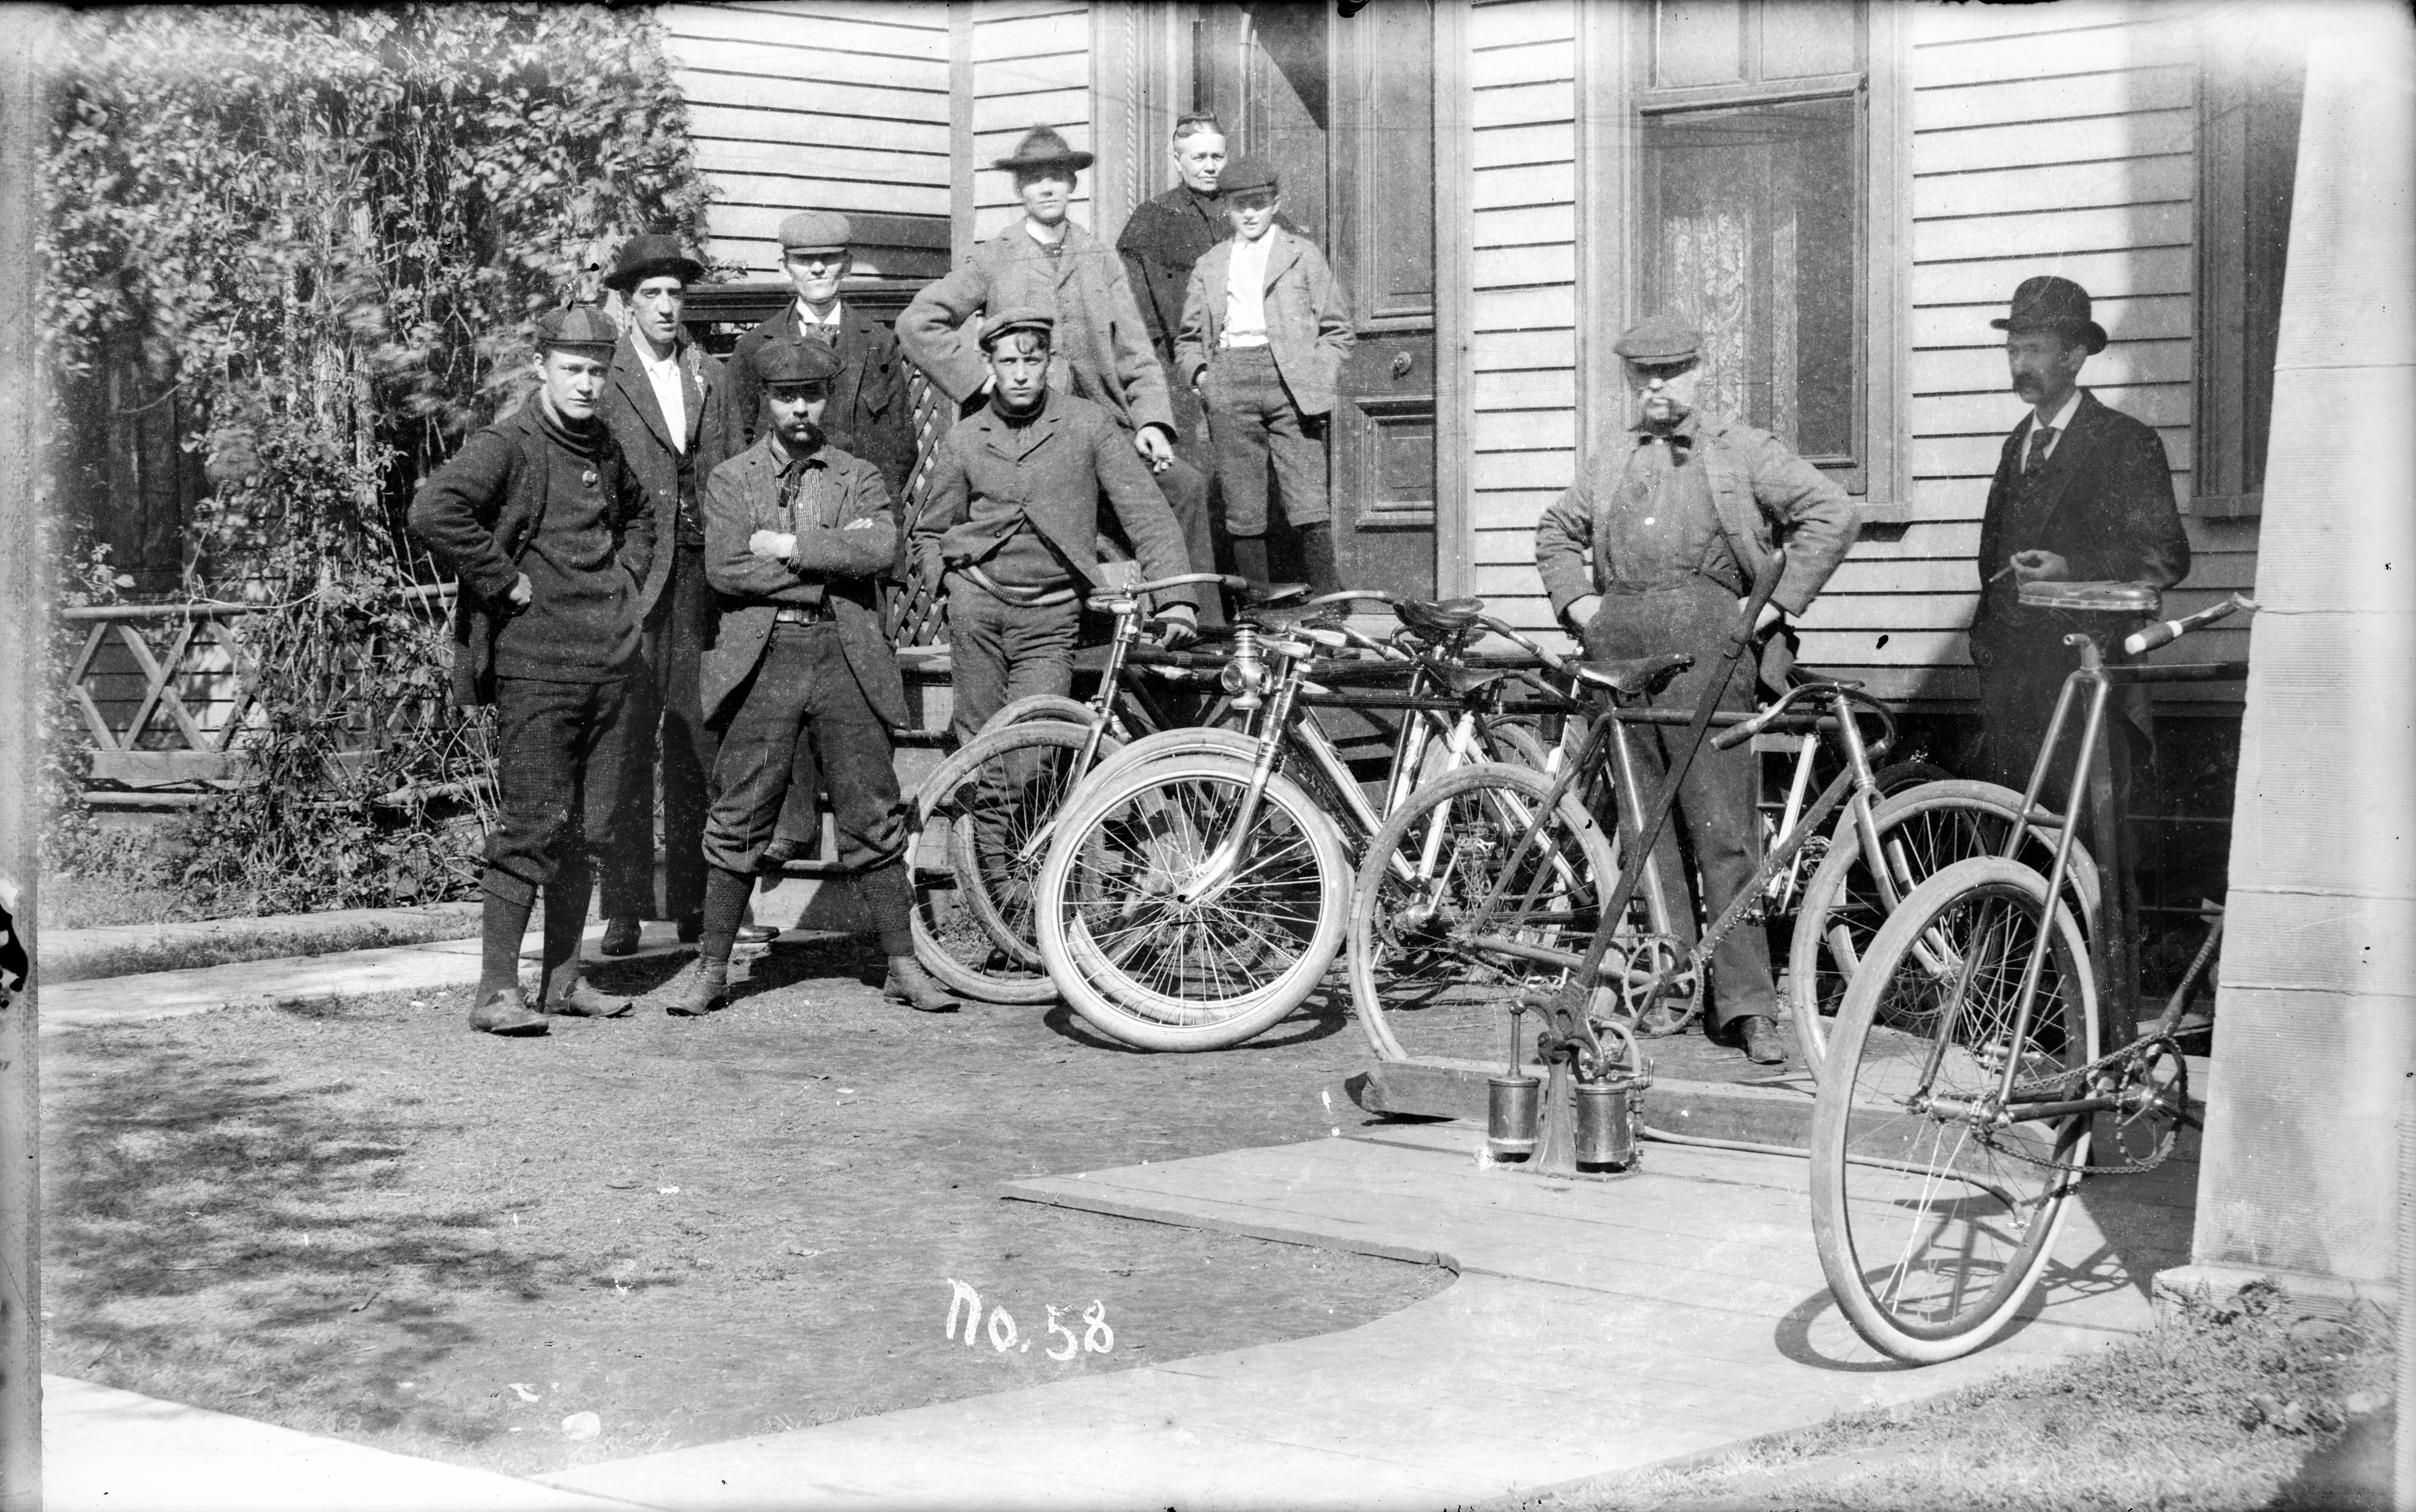 A group of men post with their bikes beside a house